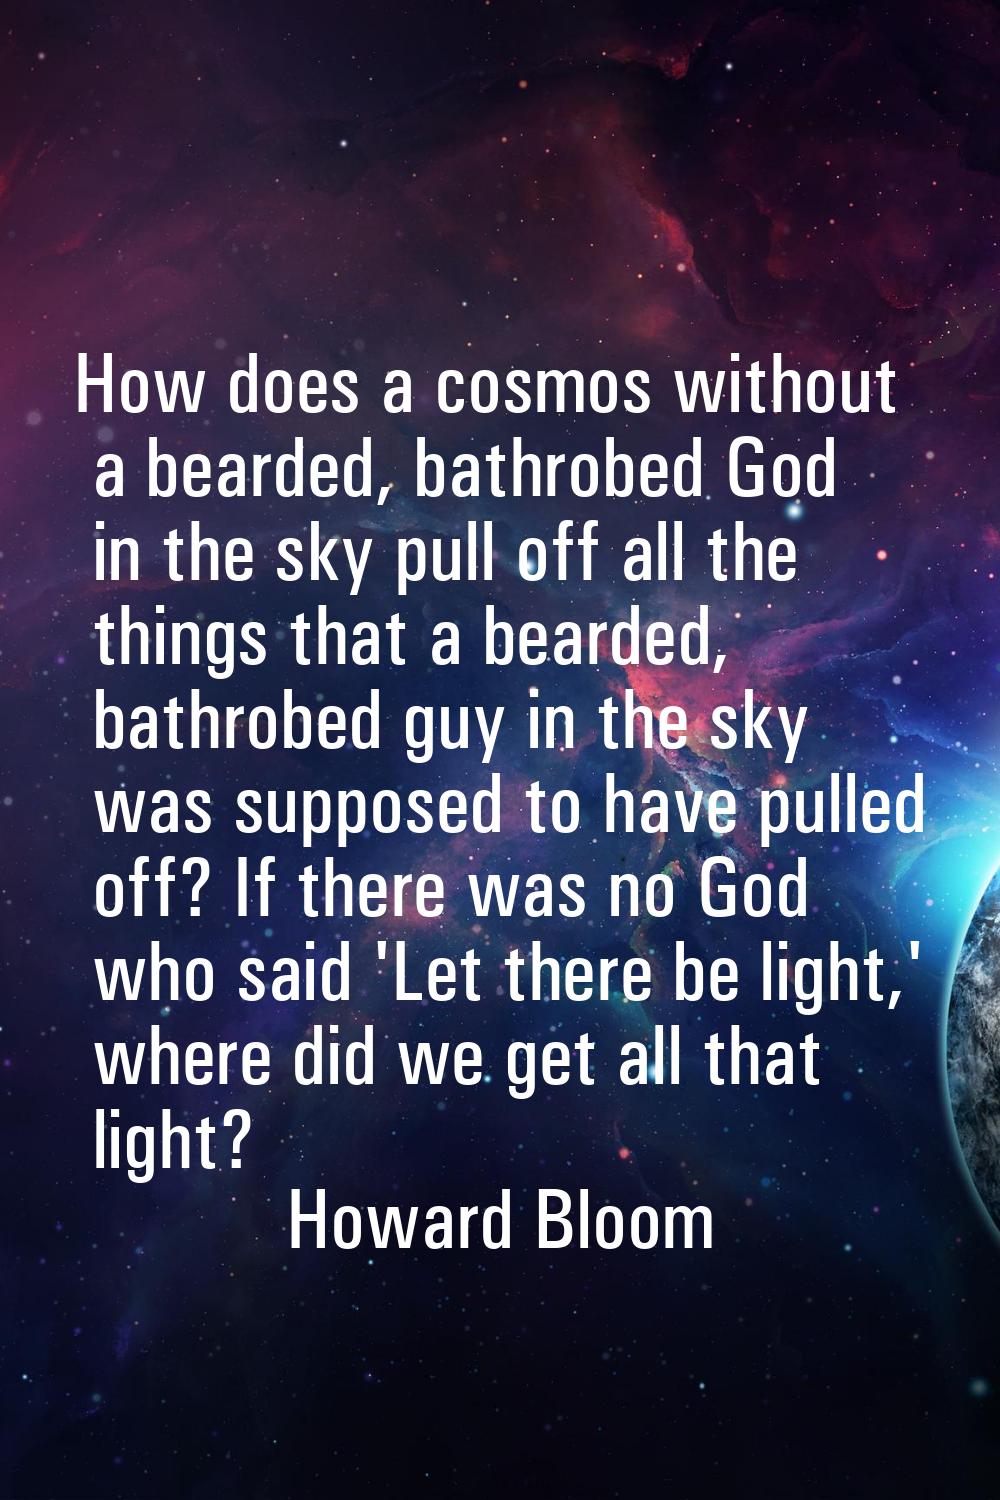 How does a cosmos without a bearded, bathrobed God in the sky pull off all the things that a bearde